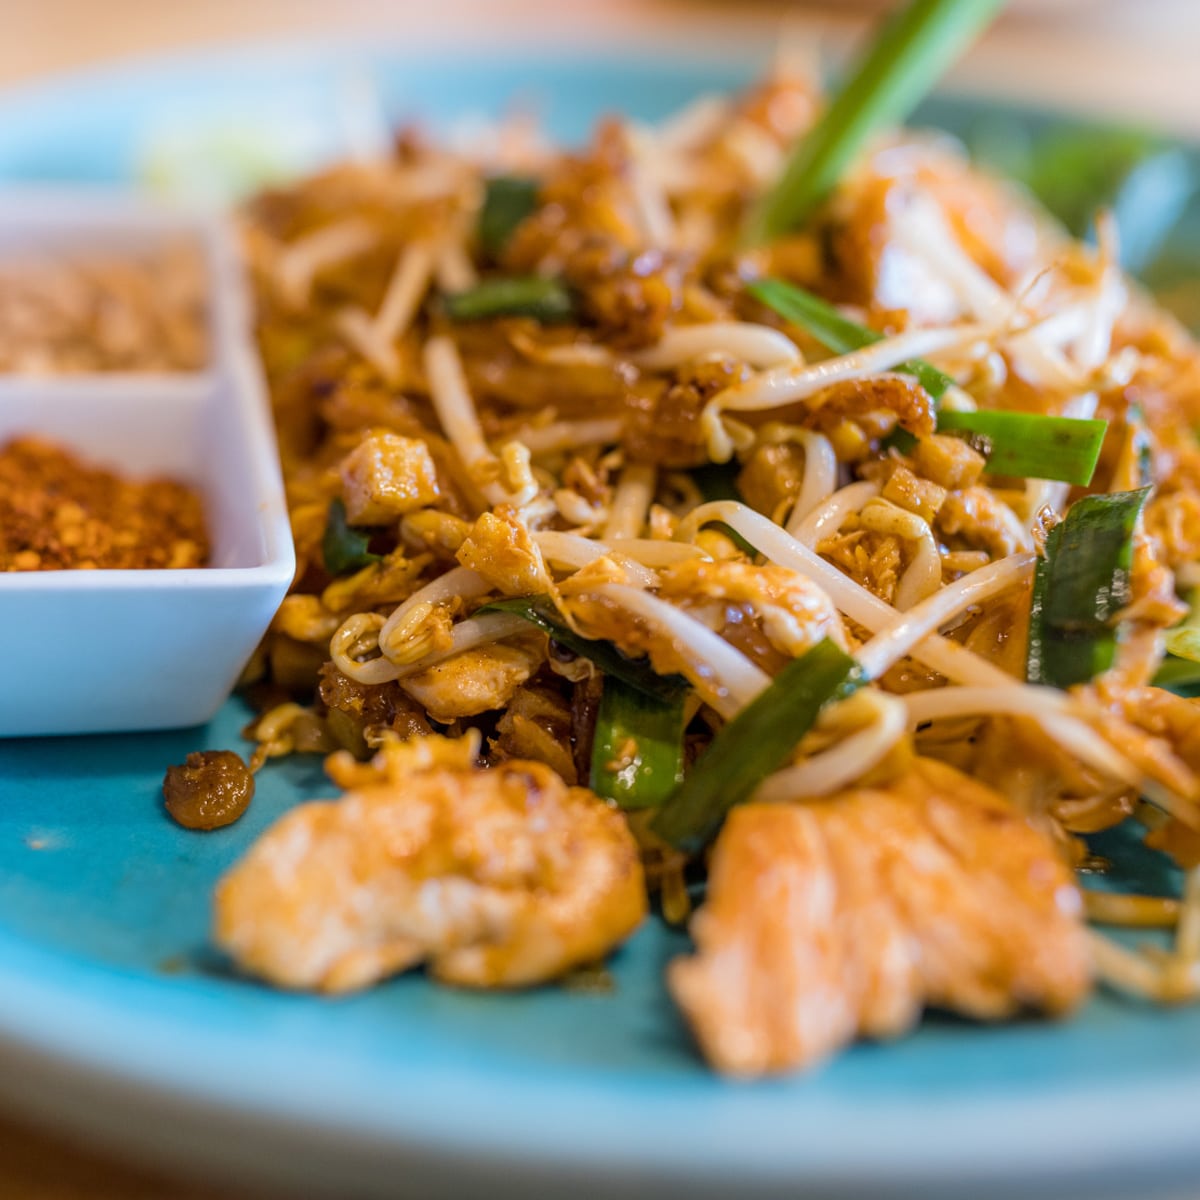 This Pad Thai recipe combines the traditional flavors of sweet, salty, sour, and spicy in pad thai for a truly delicious meal you can bring right into your kitchen - be sure to have your ingredients prepped and ready before you start!